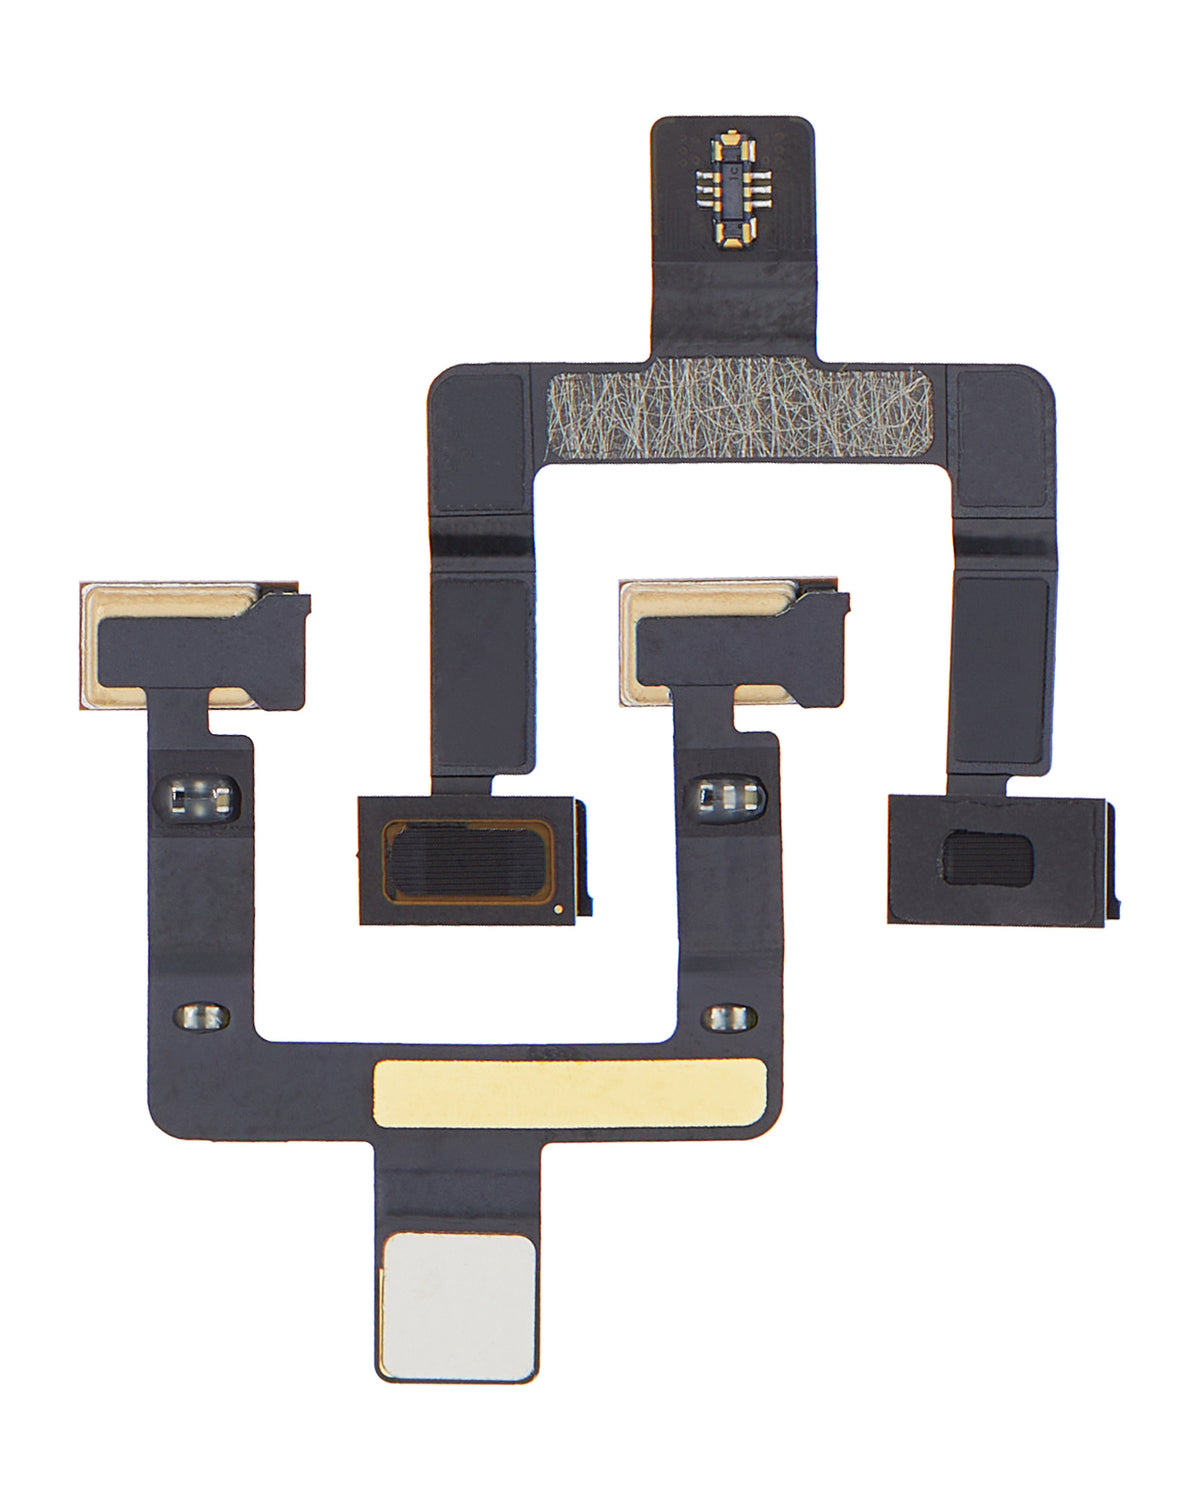 MICROPHONE FLEX CABLE COMPATIBLE FOR IPAD PRO 11" 3RD GEN (2021) / IPAD PRO 12.9" 5TH GEN (2021)